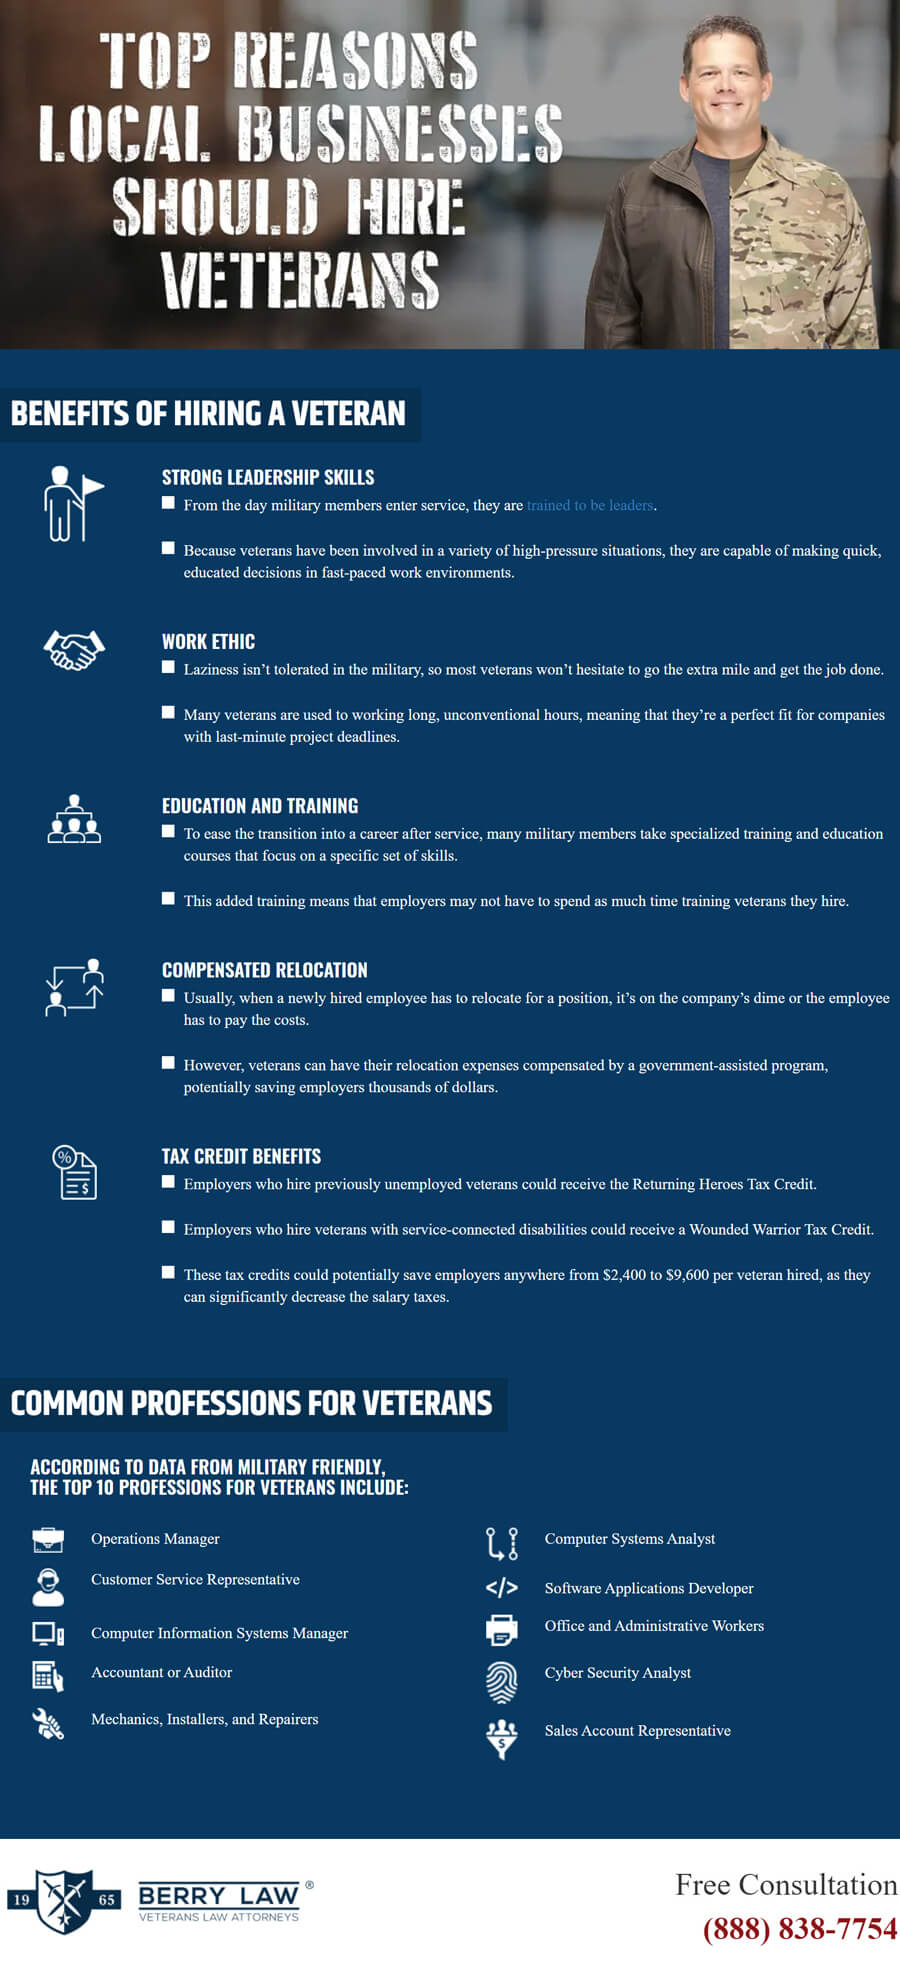 Infographic-Top-Reasons-Local-Businesses-Should-Hire-Veterans-Berry-Law-Firm.jpg  by ptsdlawyers